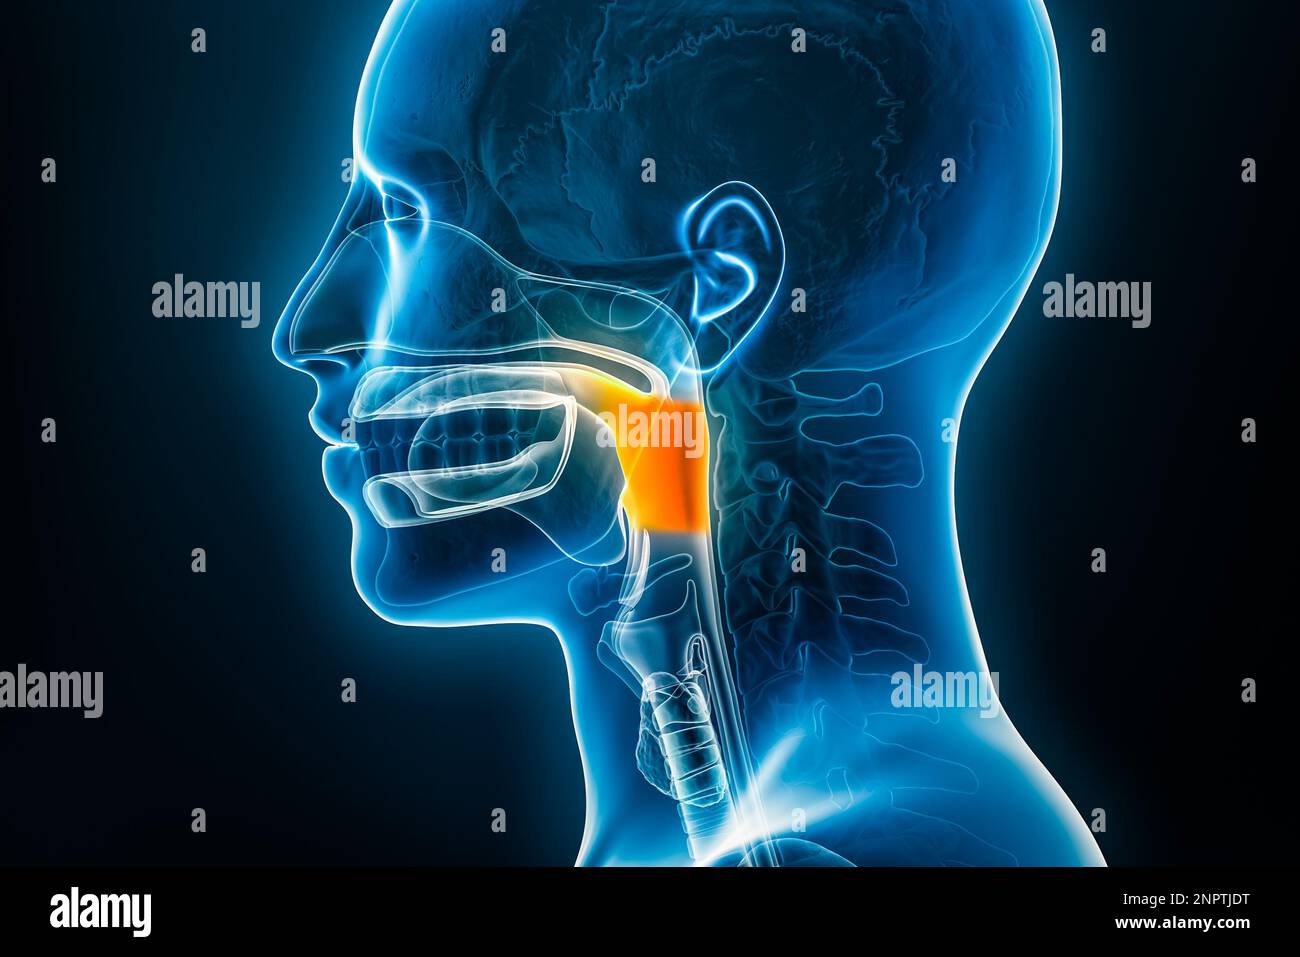 Xray lateral or profile view of the oropharynx 3D rendering illustration with male body contours. Human anatomy, medical, biology, science, medicine, Stock Photo